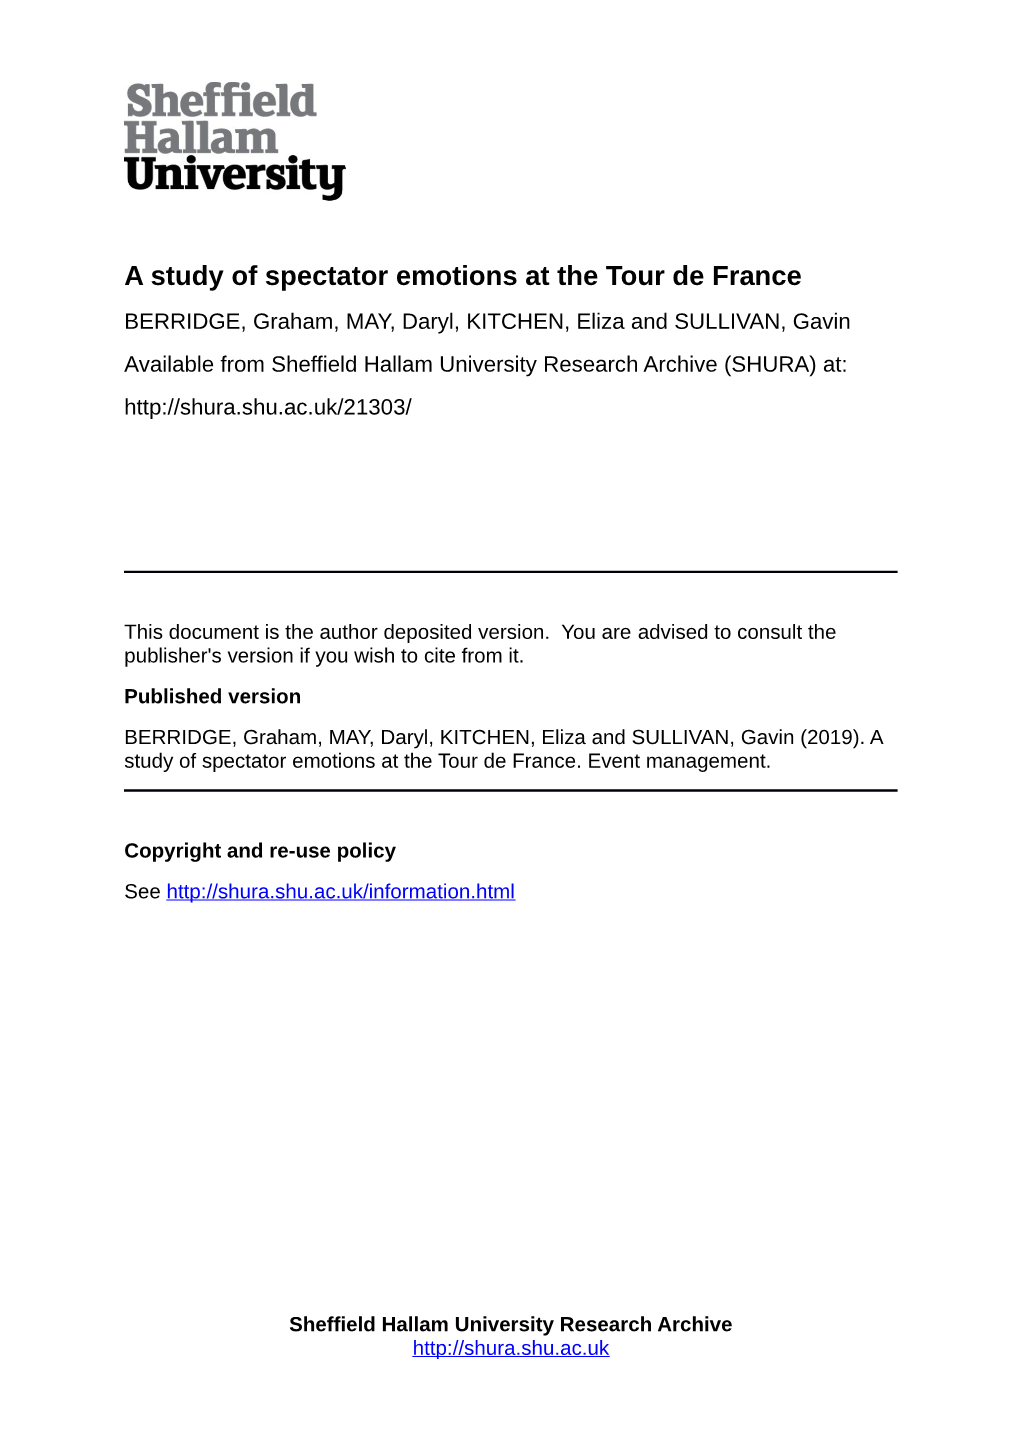 A Study of Spectator Emotions at the Tour De France